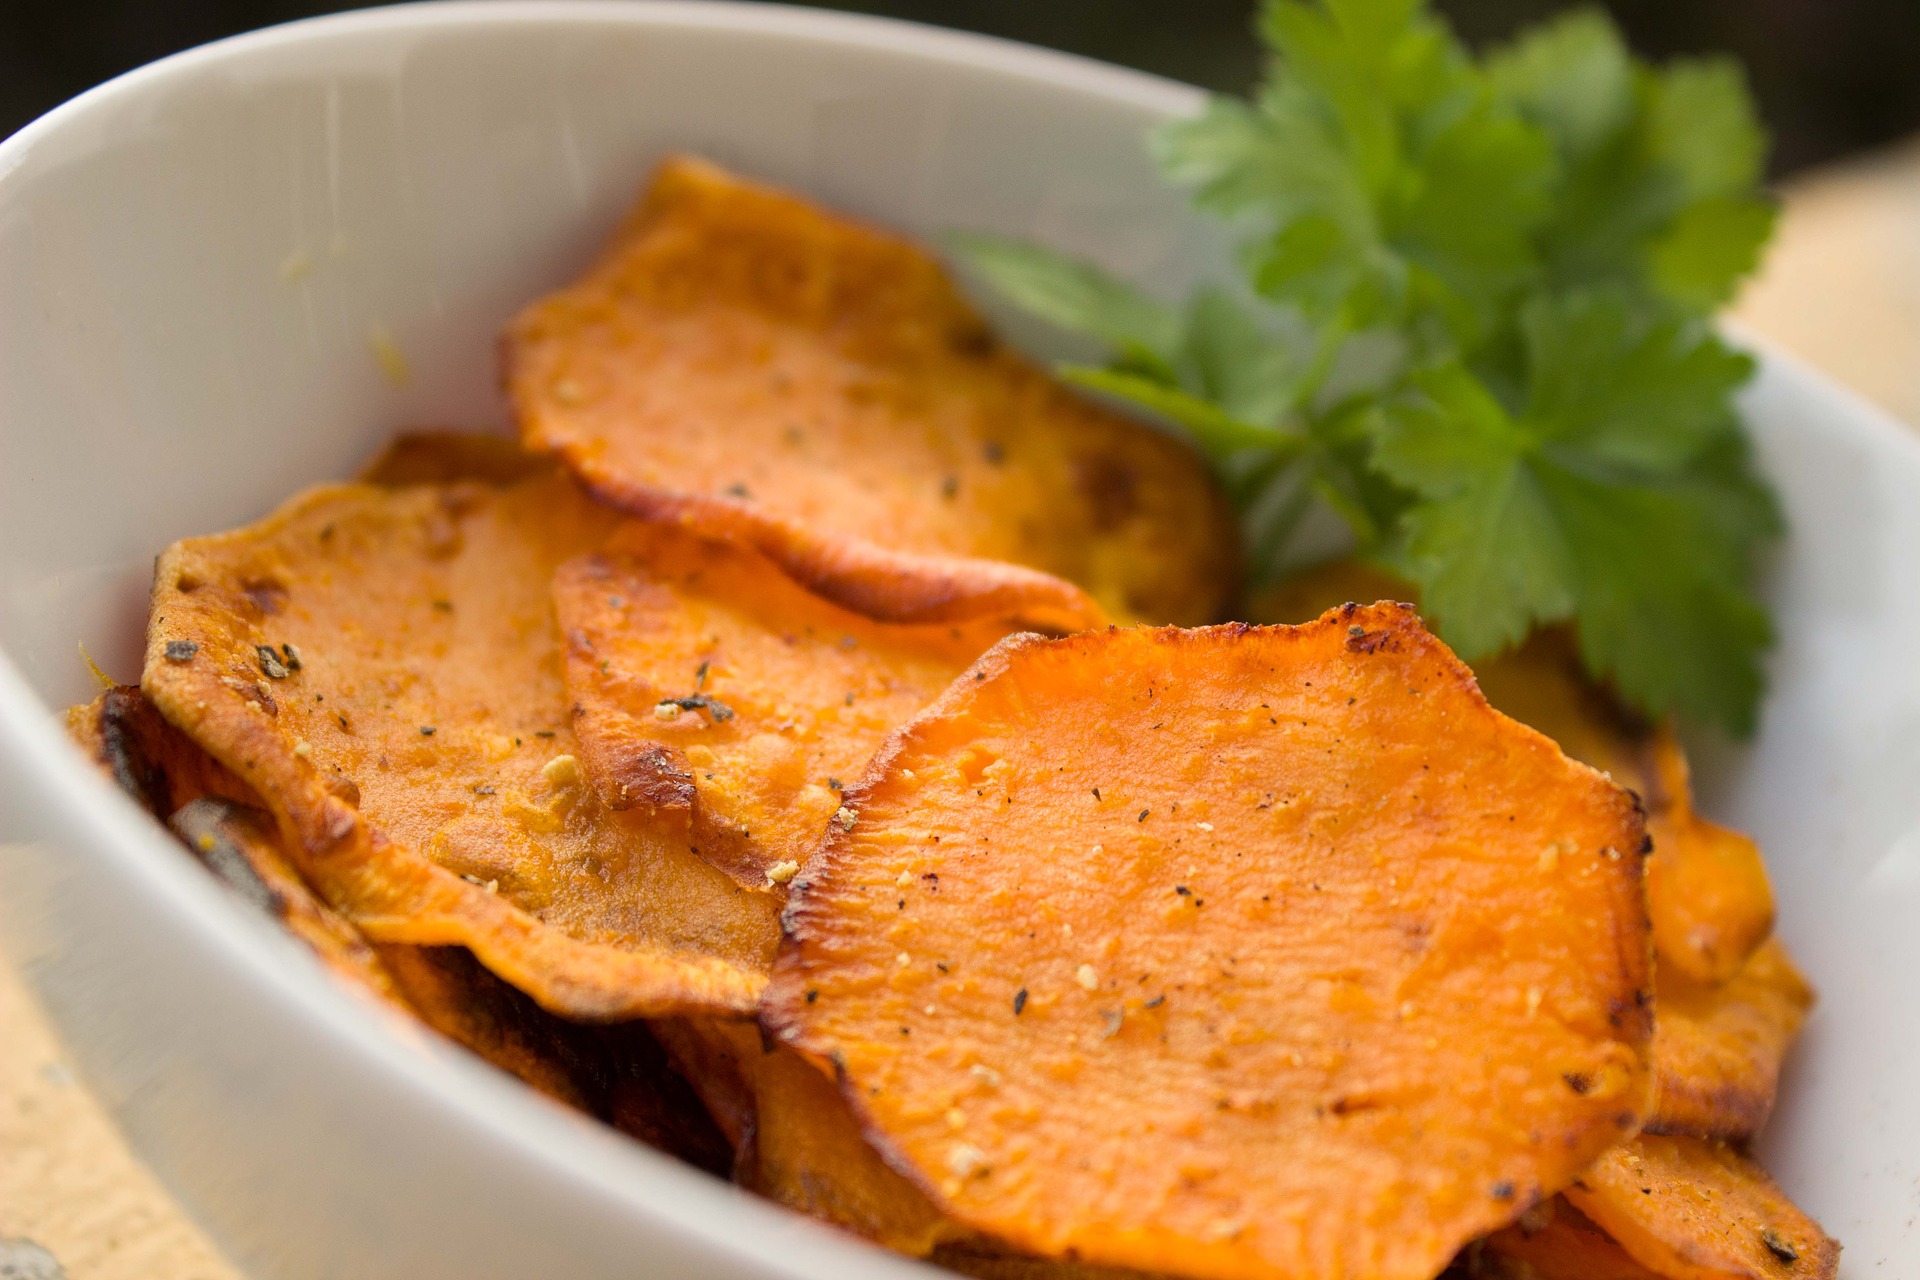 Snacking on Sweet Potato Chips Is Not The Best Idea